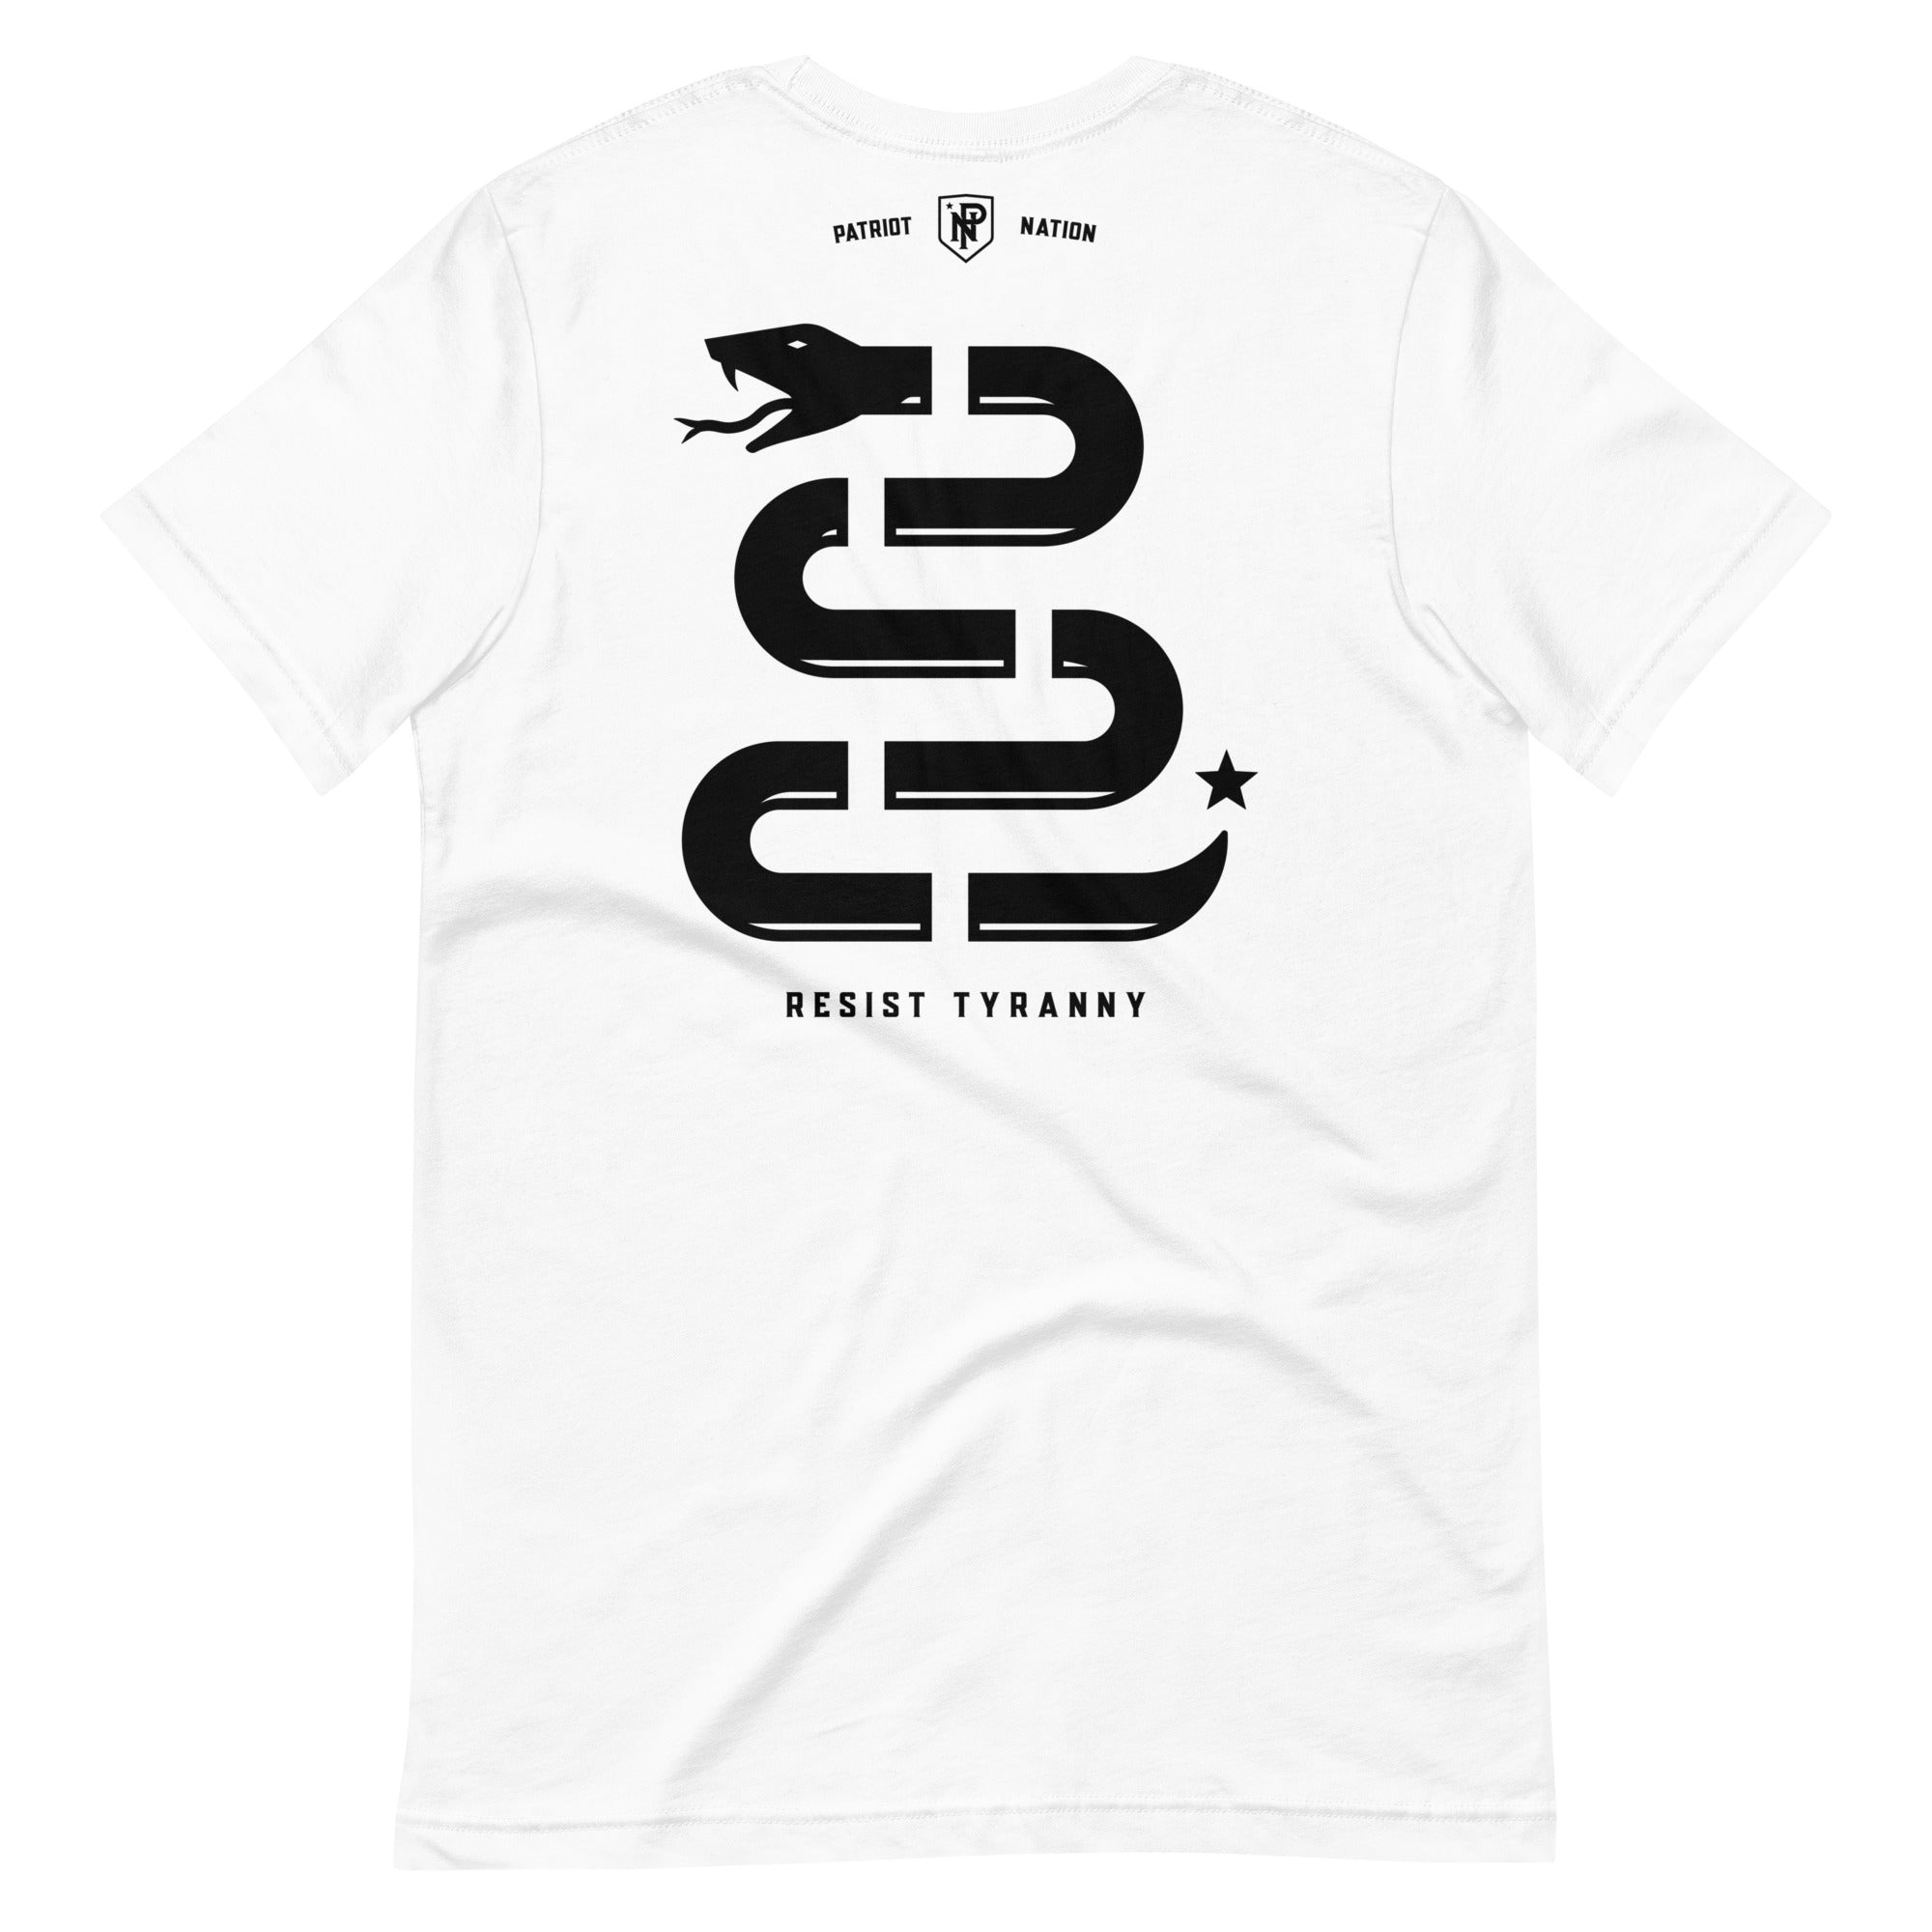 Join or Die T-shirt